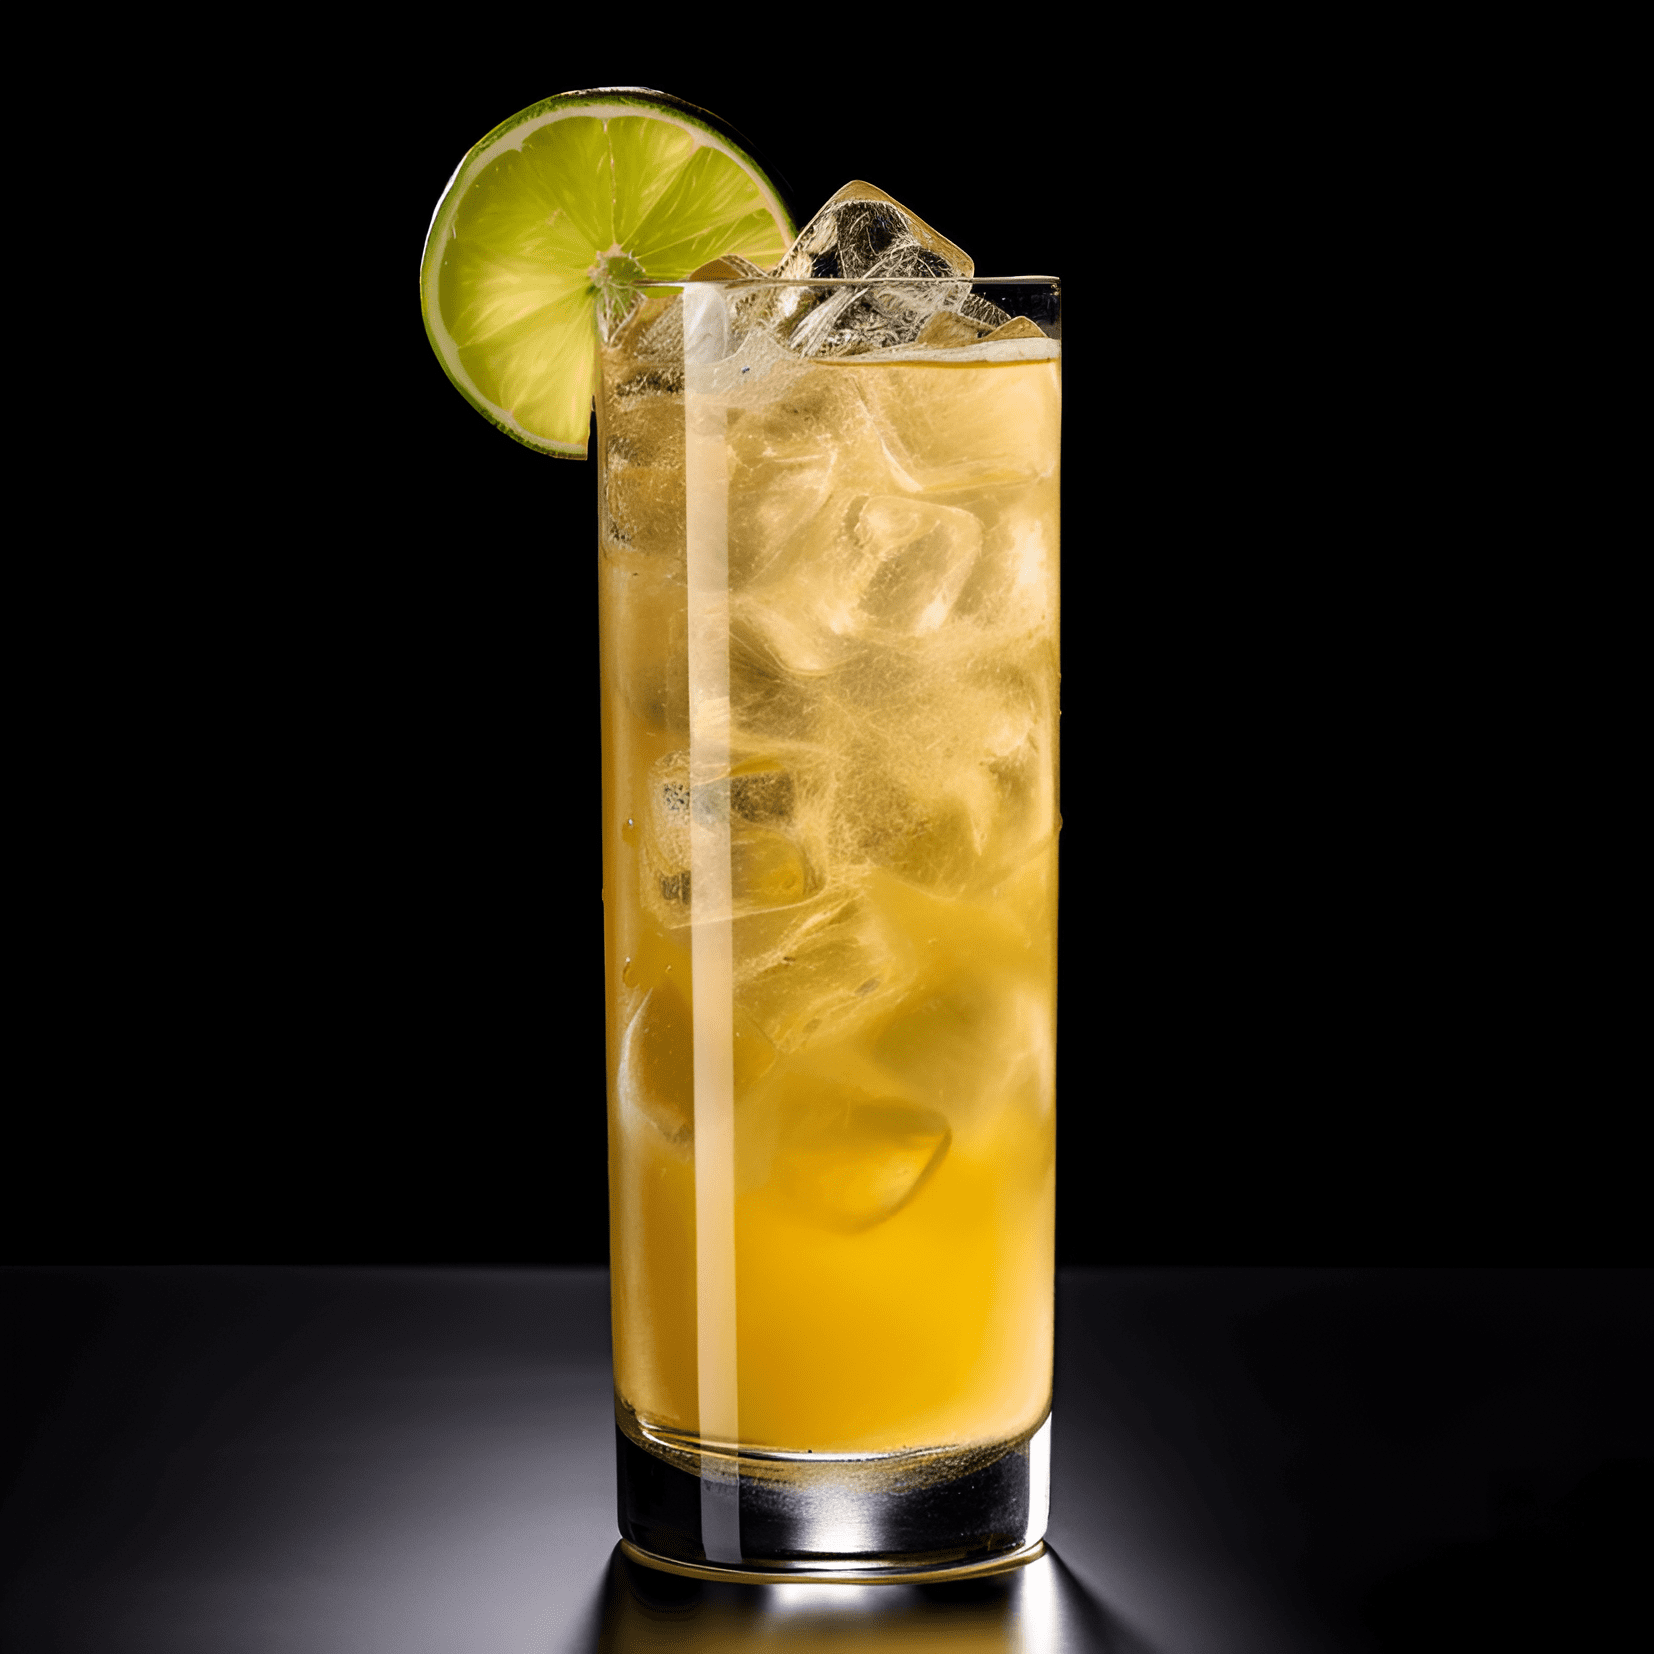 Texas Fizz Cocktail Recipe - The Texas Fizz is a well-balanced cocktail with a combination of sweet, sour, and spicy flavors. The jalapeño adds a kick of heat, while the gin and lemon juice provide a refreshing and tangy taste. The simple syrup and club soda add a touch of sweetness and effervescence to the drink.